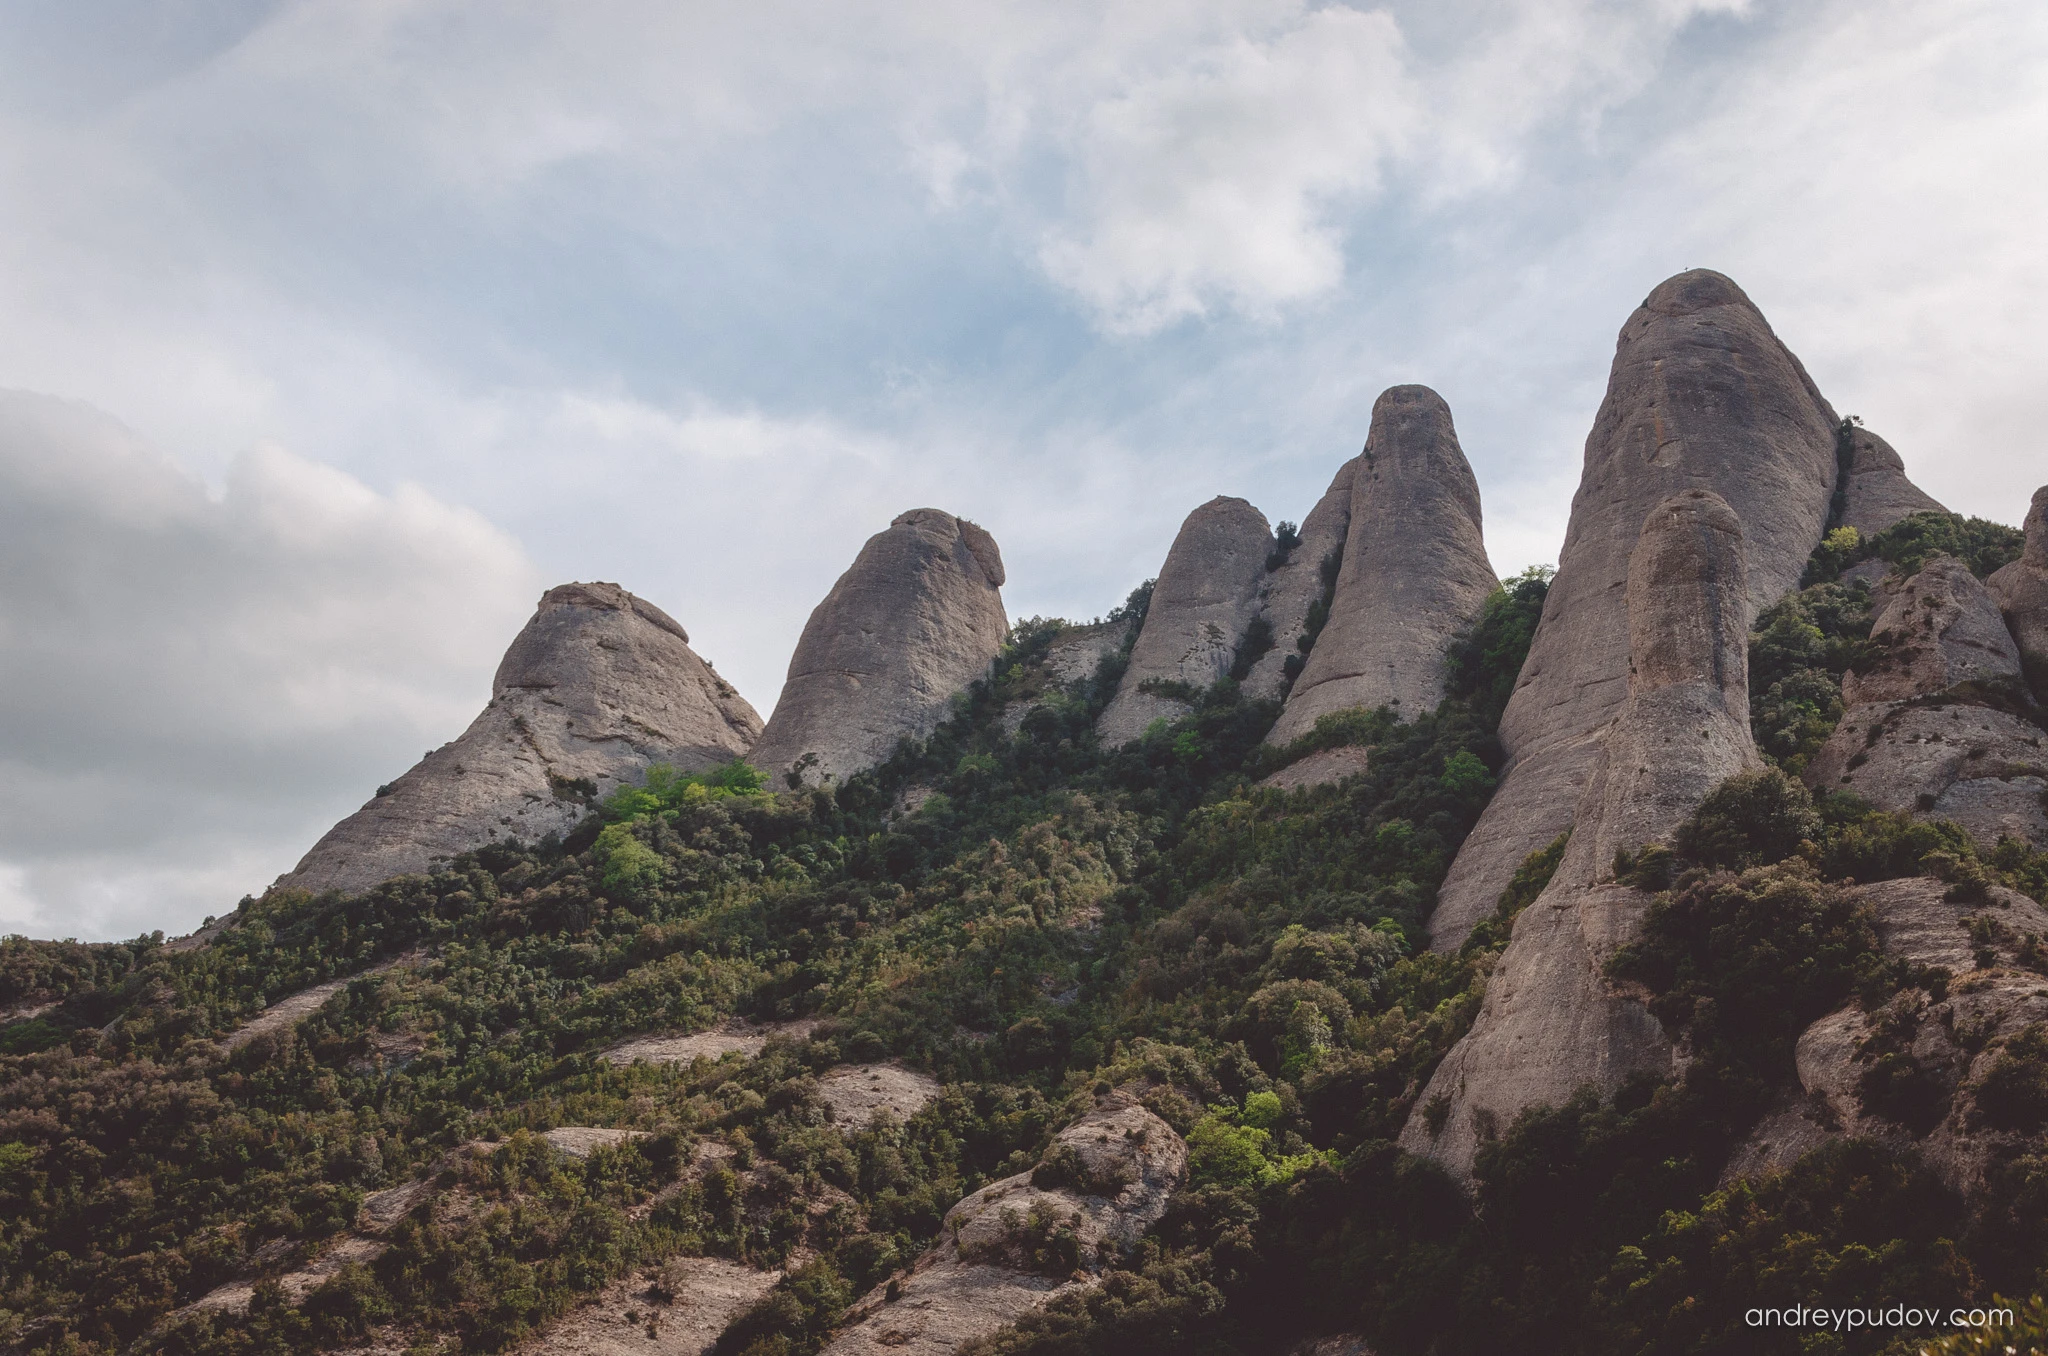 Montserrat - The massif, some 10 kilometres long and 5 kilometres wide, reaches the limits of the regions of Bages, Baix Llobregat and Anoia, and the Natural Park occupies 3,630 hectares of the municipalities of Bruc (Anoia), Marganell and Monistrol de Montserrat (Bages) and Collbató (Baix Llobregat), with almost 2,000 of these hectares as a nature reserve. An additional area of 4,039 hectares is catalogued as a protected zone, with part of the municipalities of Castellbell and El Vilar (Bages), Esparreguera (Baix Llobregat) and Vacarisses (Vallès Occidental).